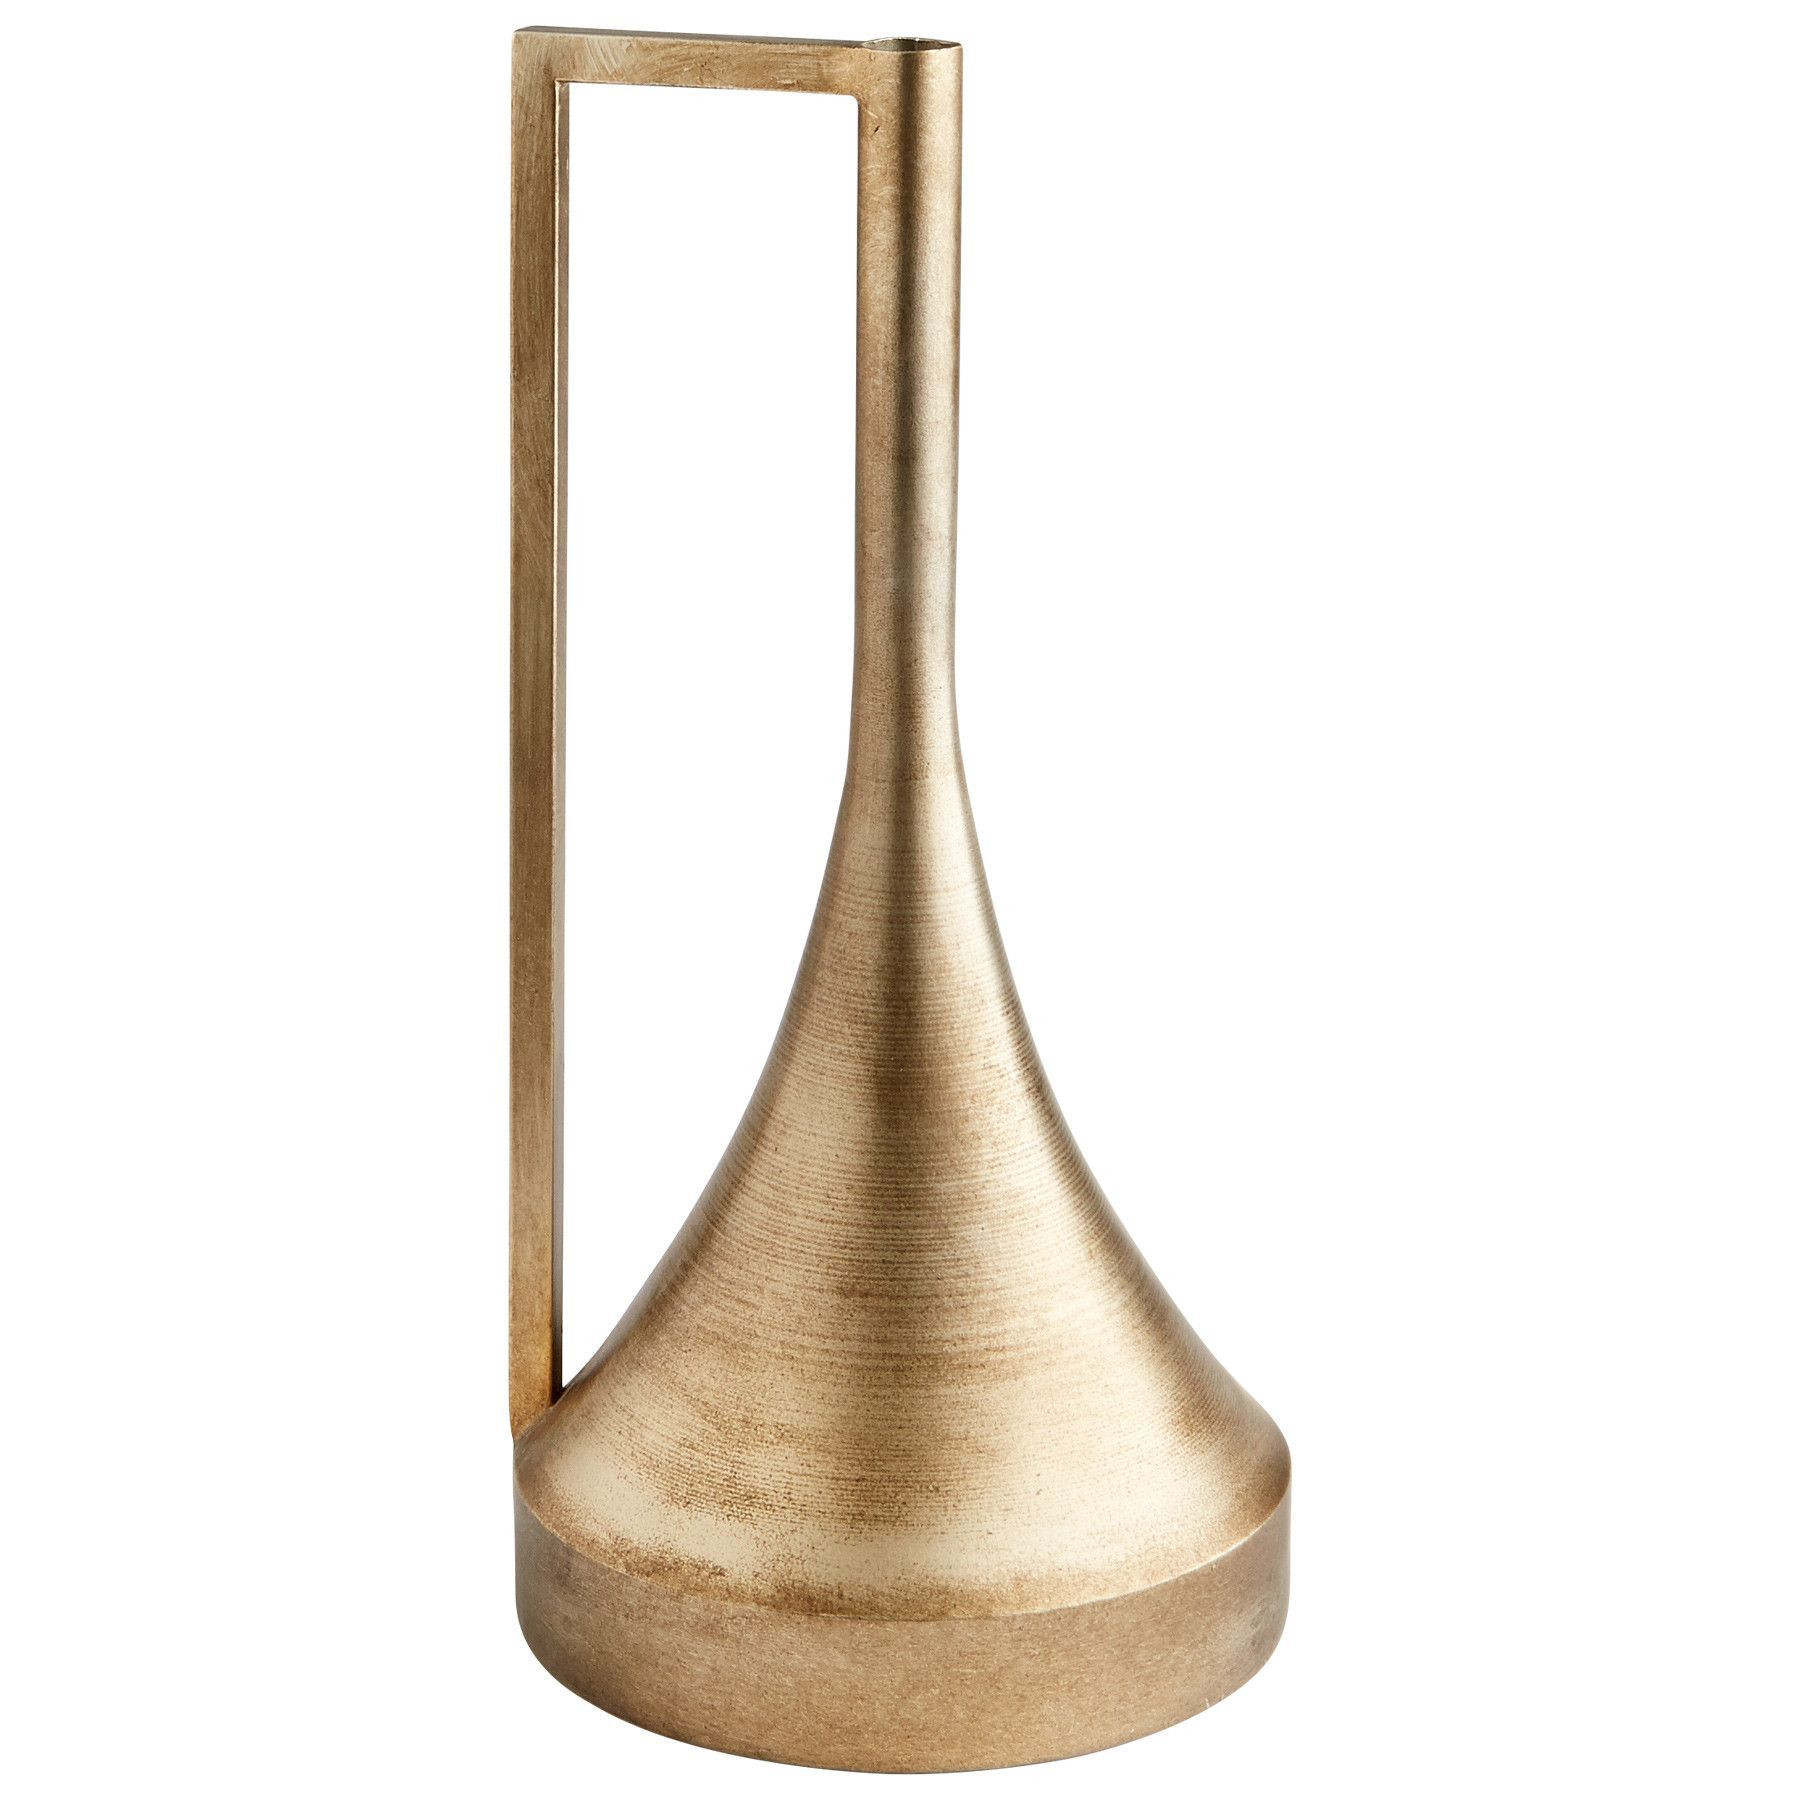 14 Elegant Tall Brass Vase 2024 free download tall brass vase of whats your angle vase pinterest products throughout whats your angle vase